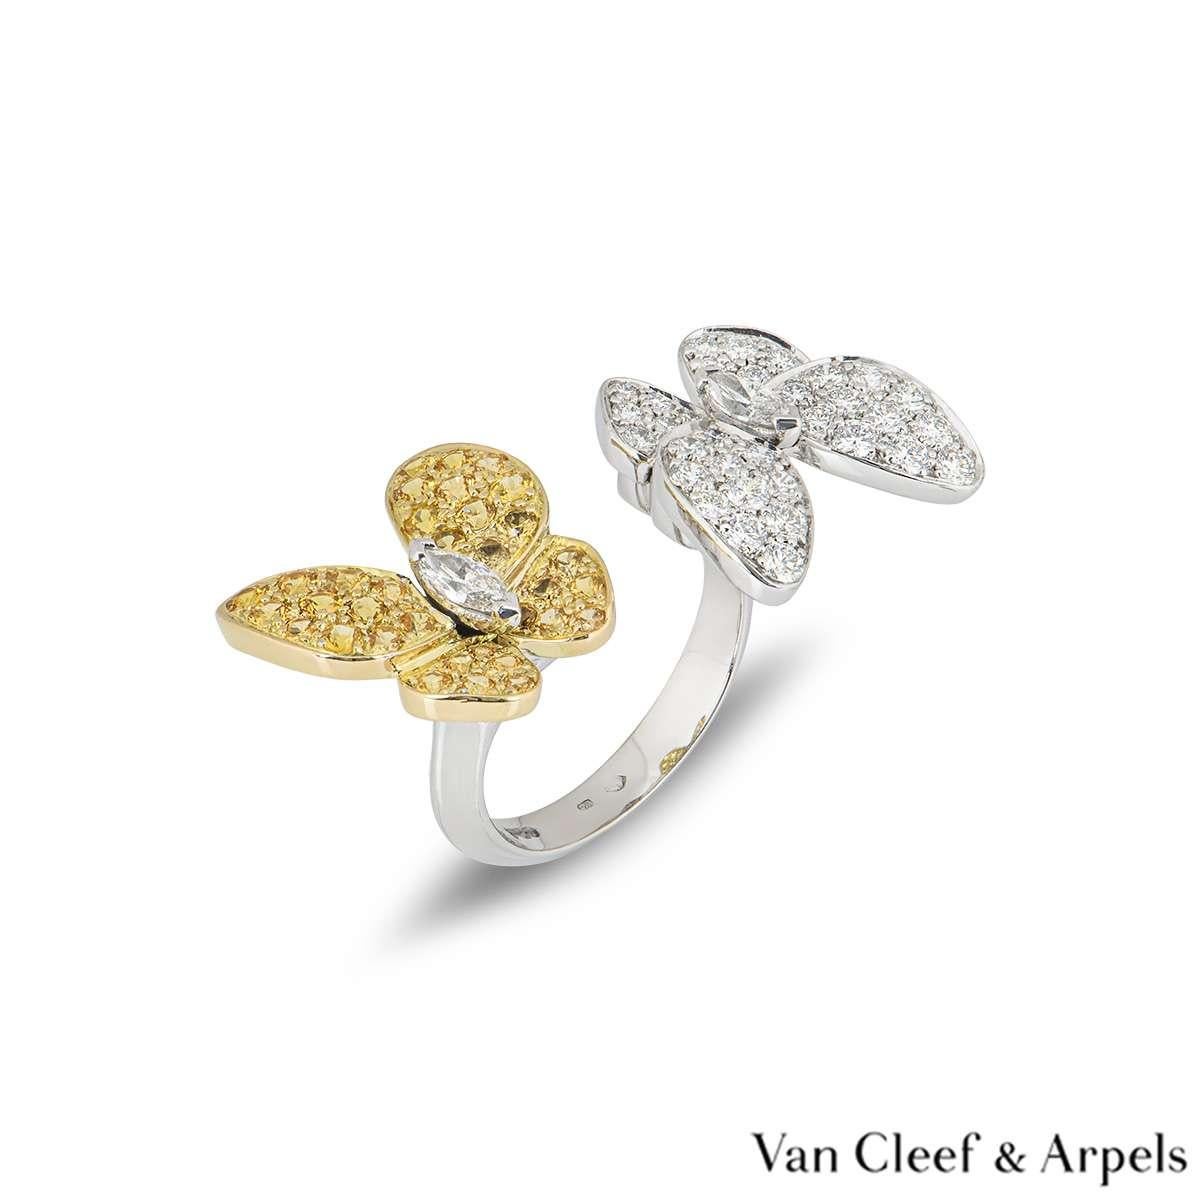 An 18k white gold Two Butterfly Between the Finger ring from the Fauna collection by Van Cleef & Arpels. The ring features two butterfly motifs facing opposite directions, one is set with round brilliant cut diamonds and the other is set with yellow